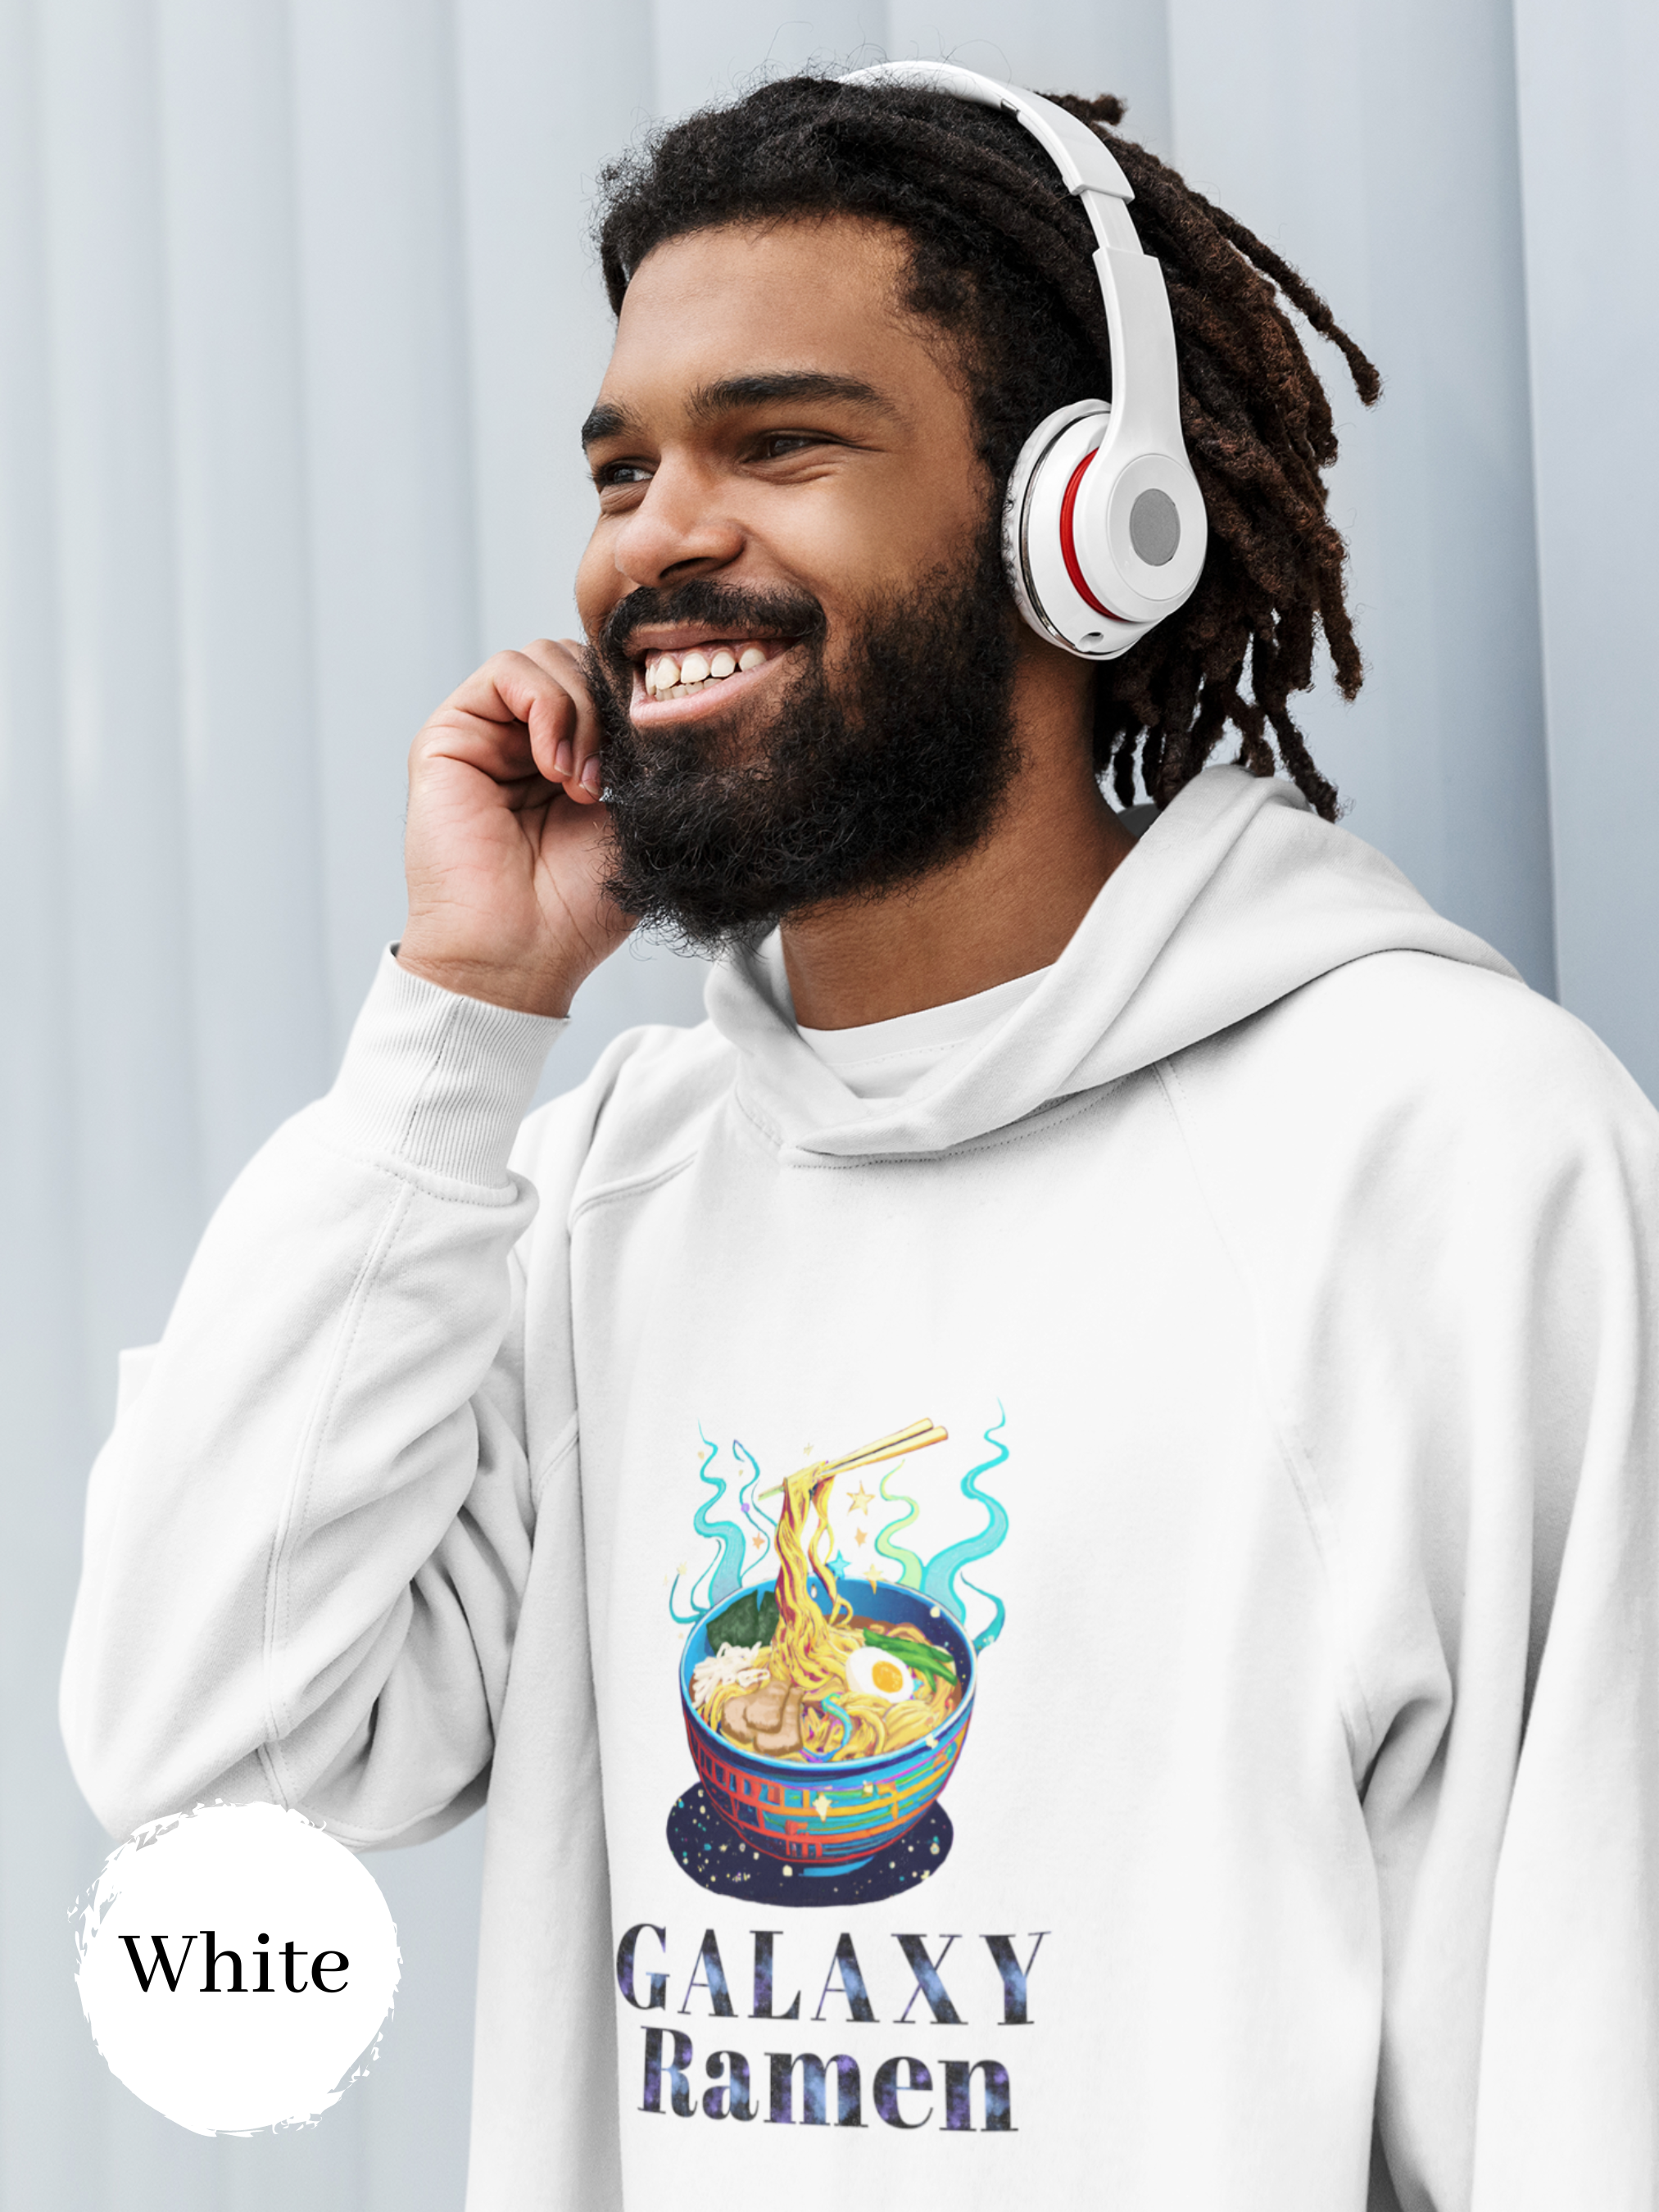 Ramen Hoodie: "Galaxy Ramen" with Starry Background and Ramen Art for Foodie Fans